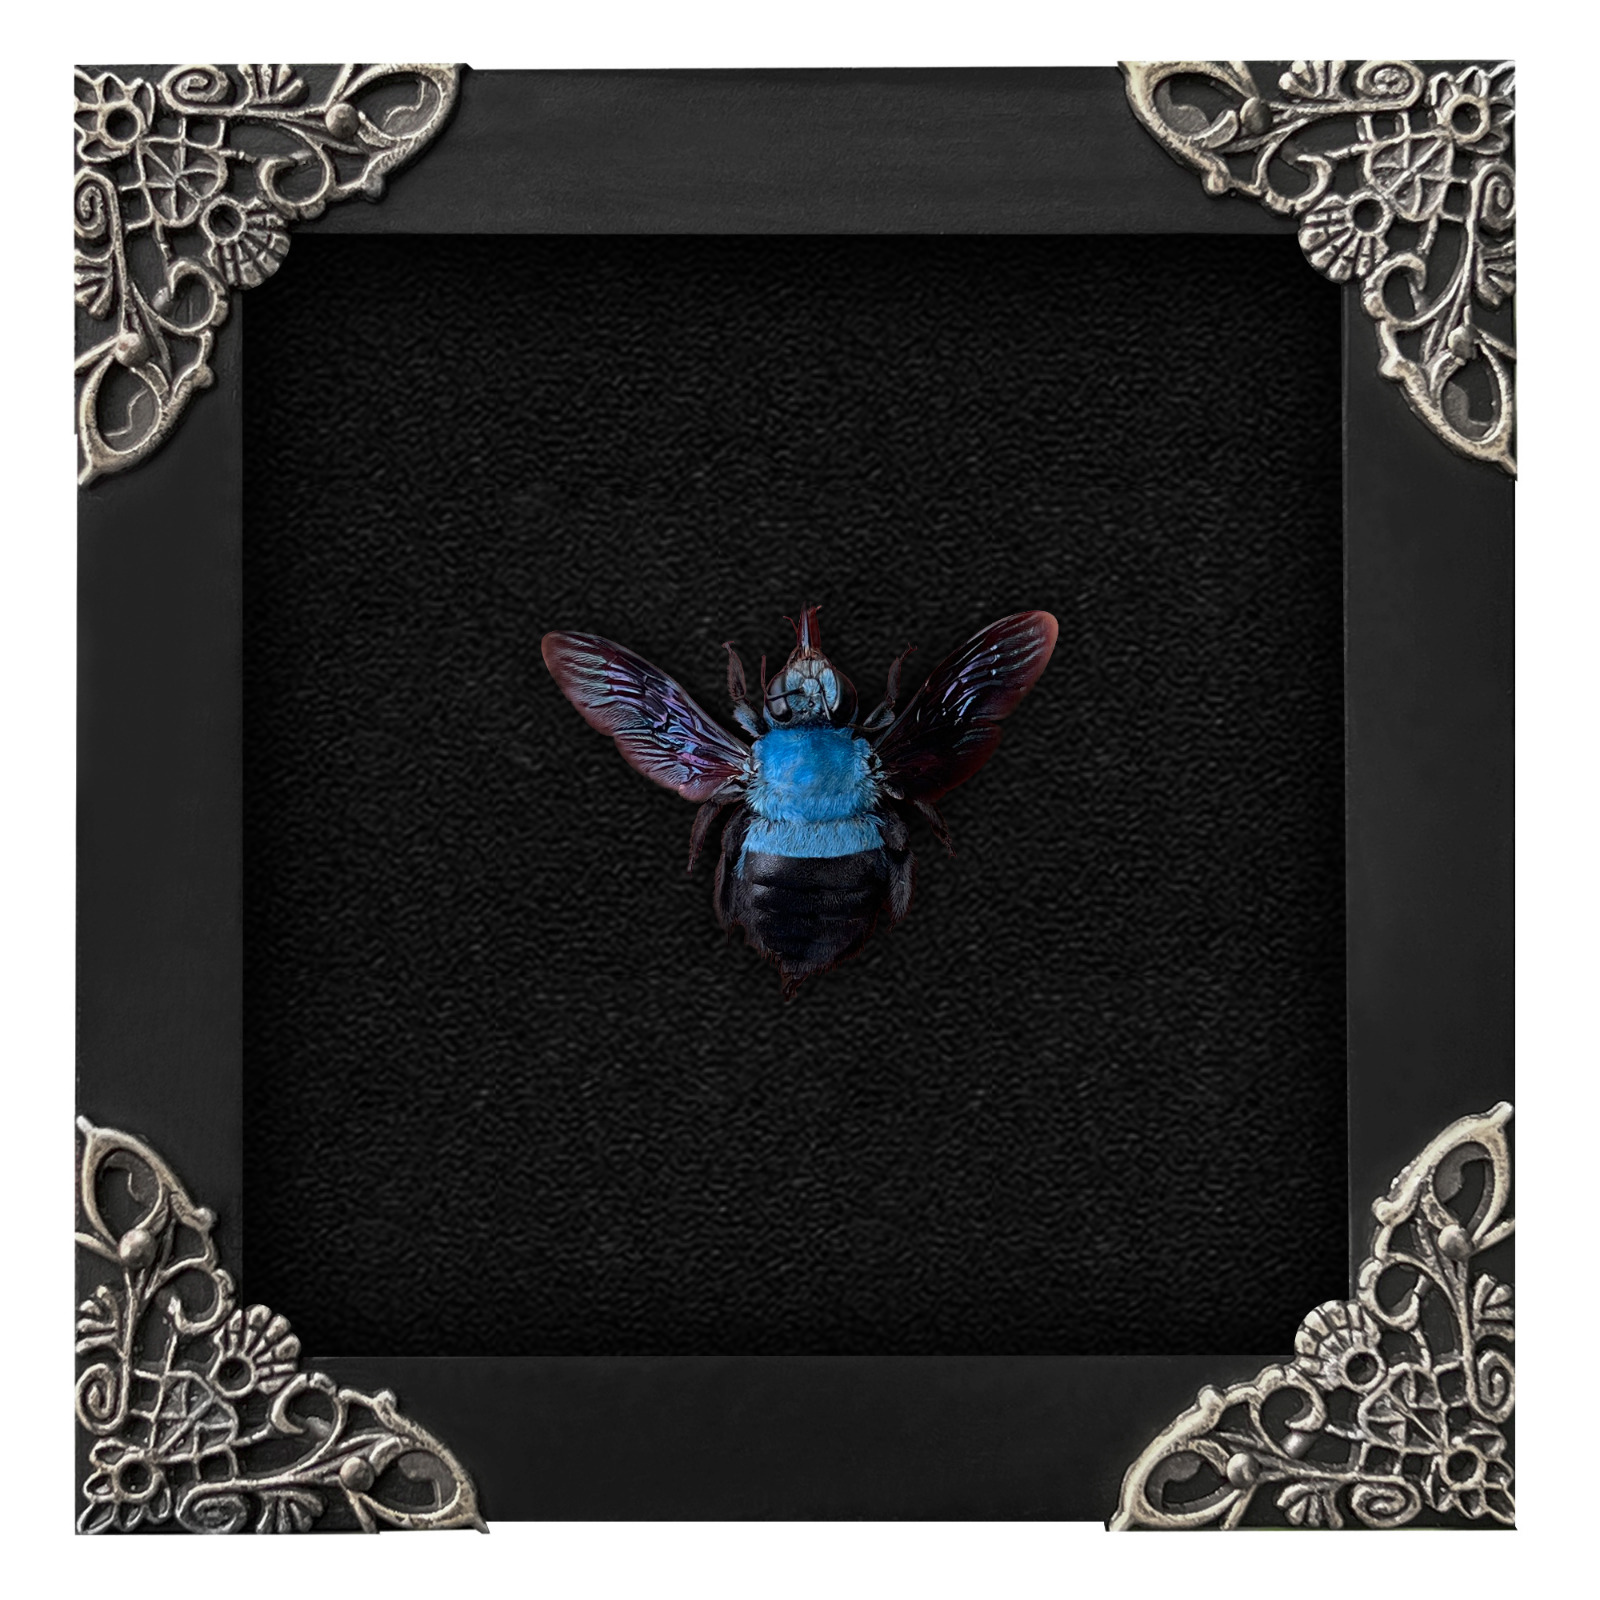 Real Framed Insects Beetle Taxidermy Oddities Bugs Dead Gothic Decor Wall Art